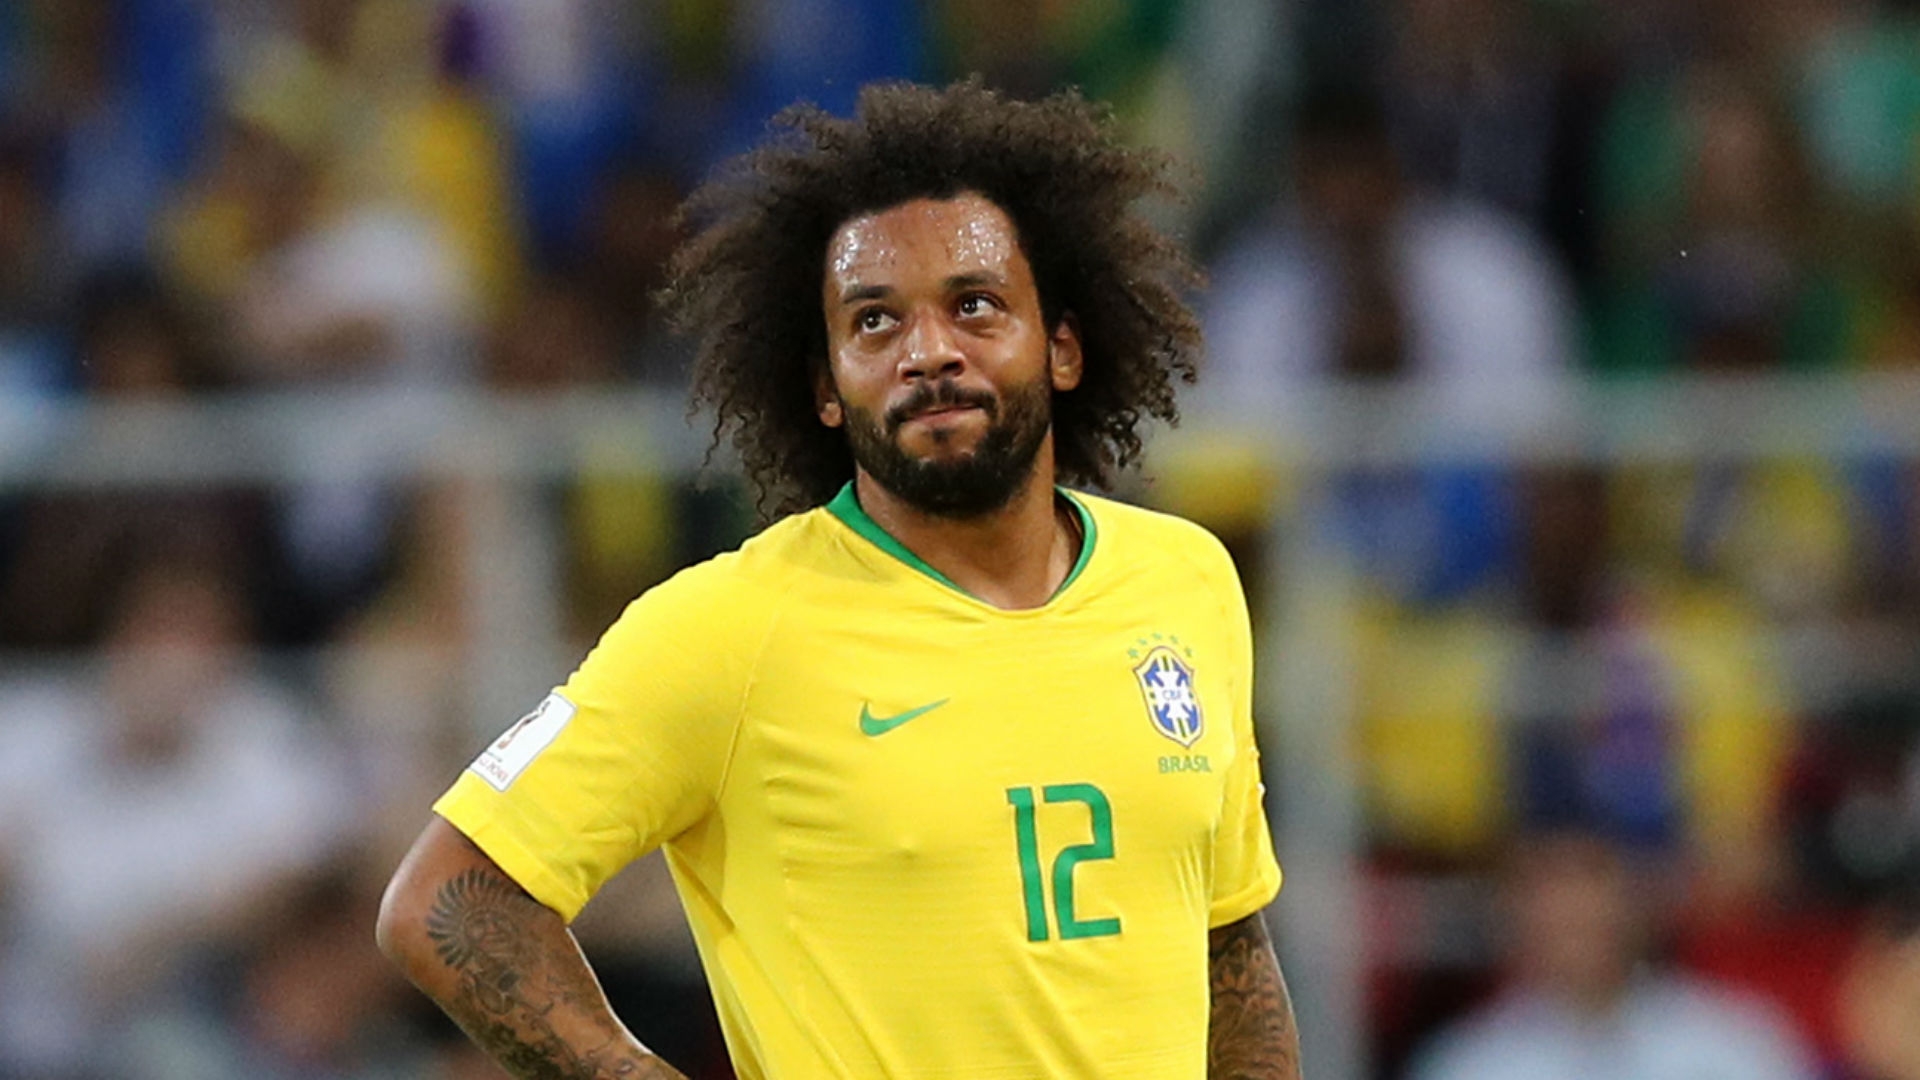 Marcelo reacts to Copa America snub: 'The only thing I can do is work  harder to return' - Football 